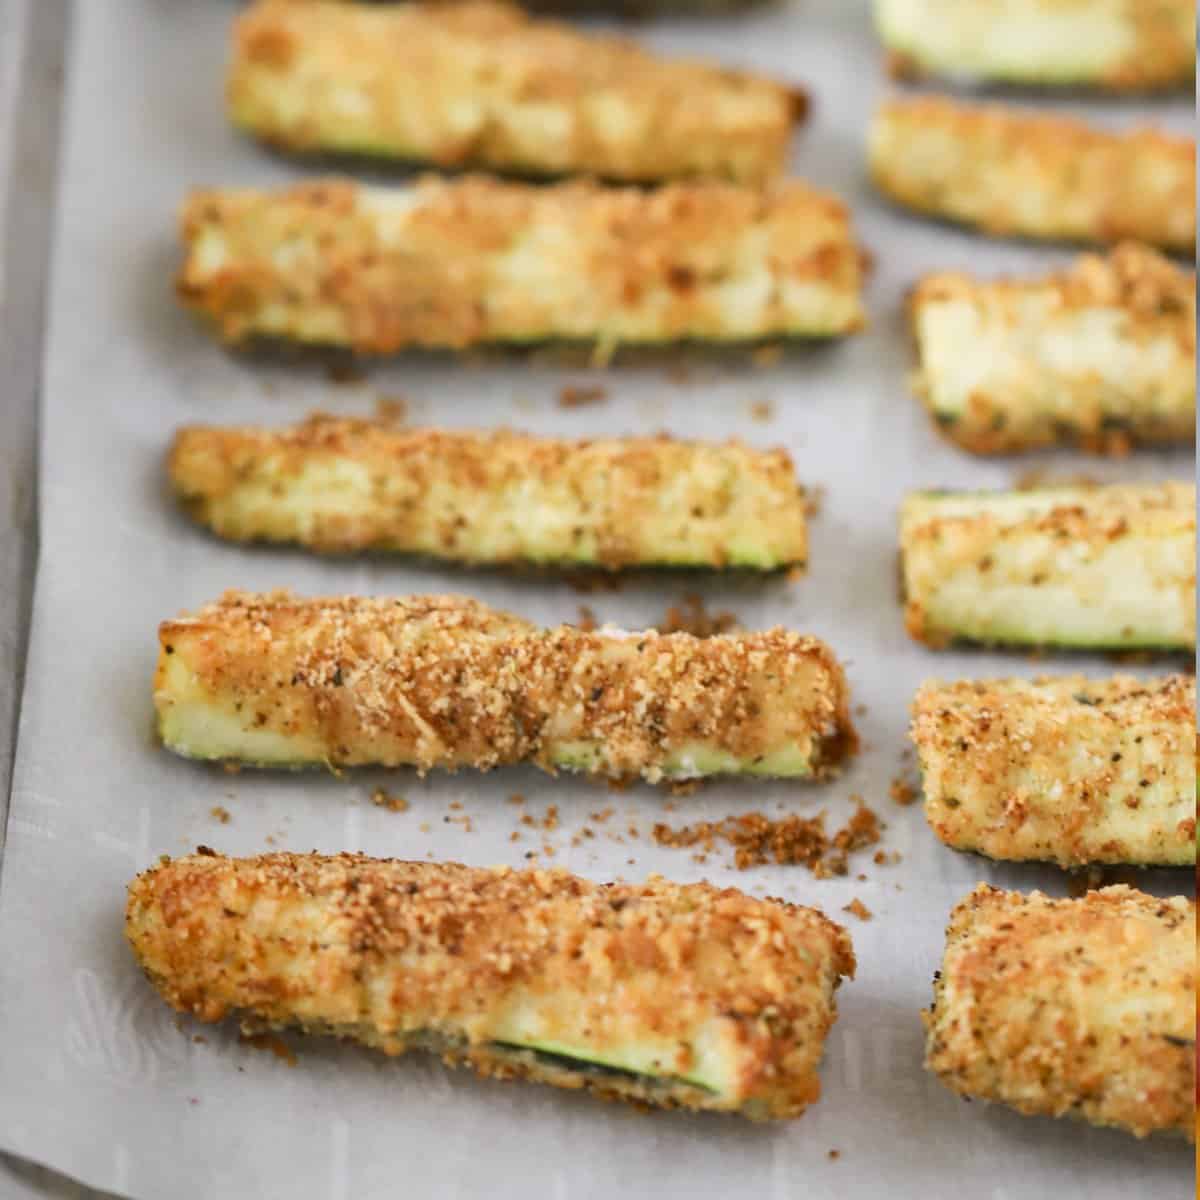 Baked Zucchini Fries Recipe - The Carefree Kitchen